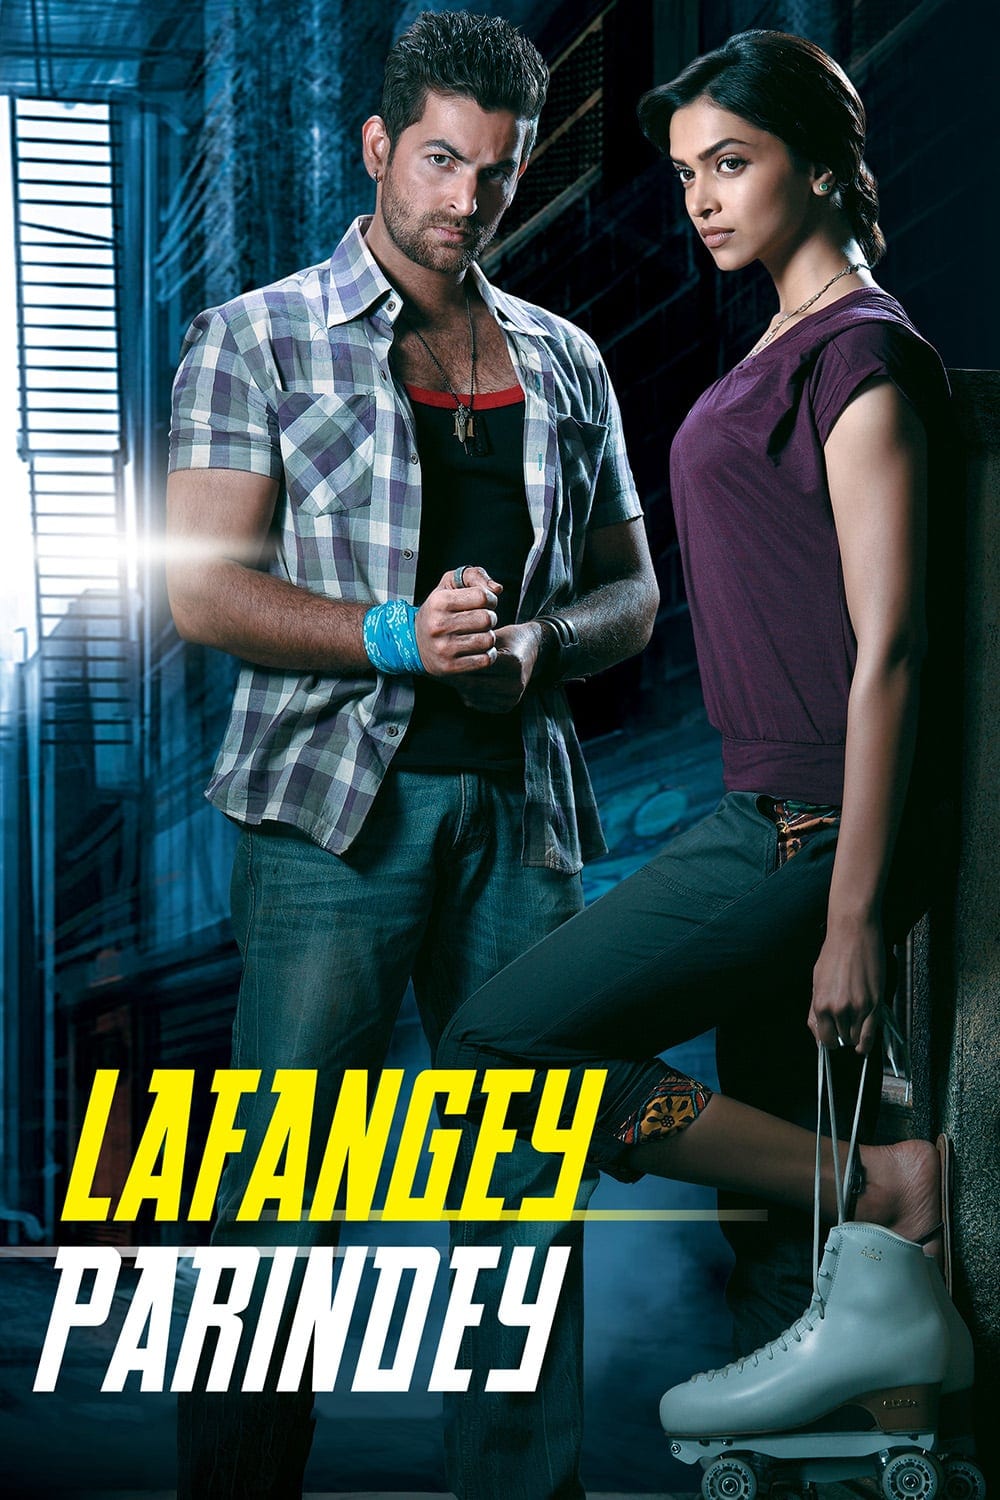 Poster for the movie "Lafangey Parindey"